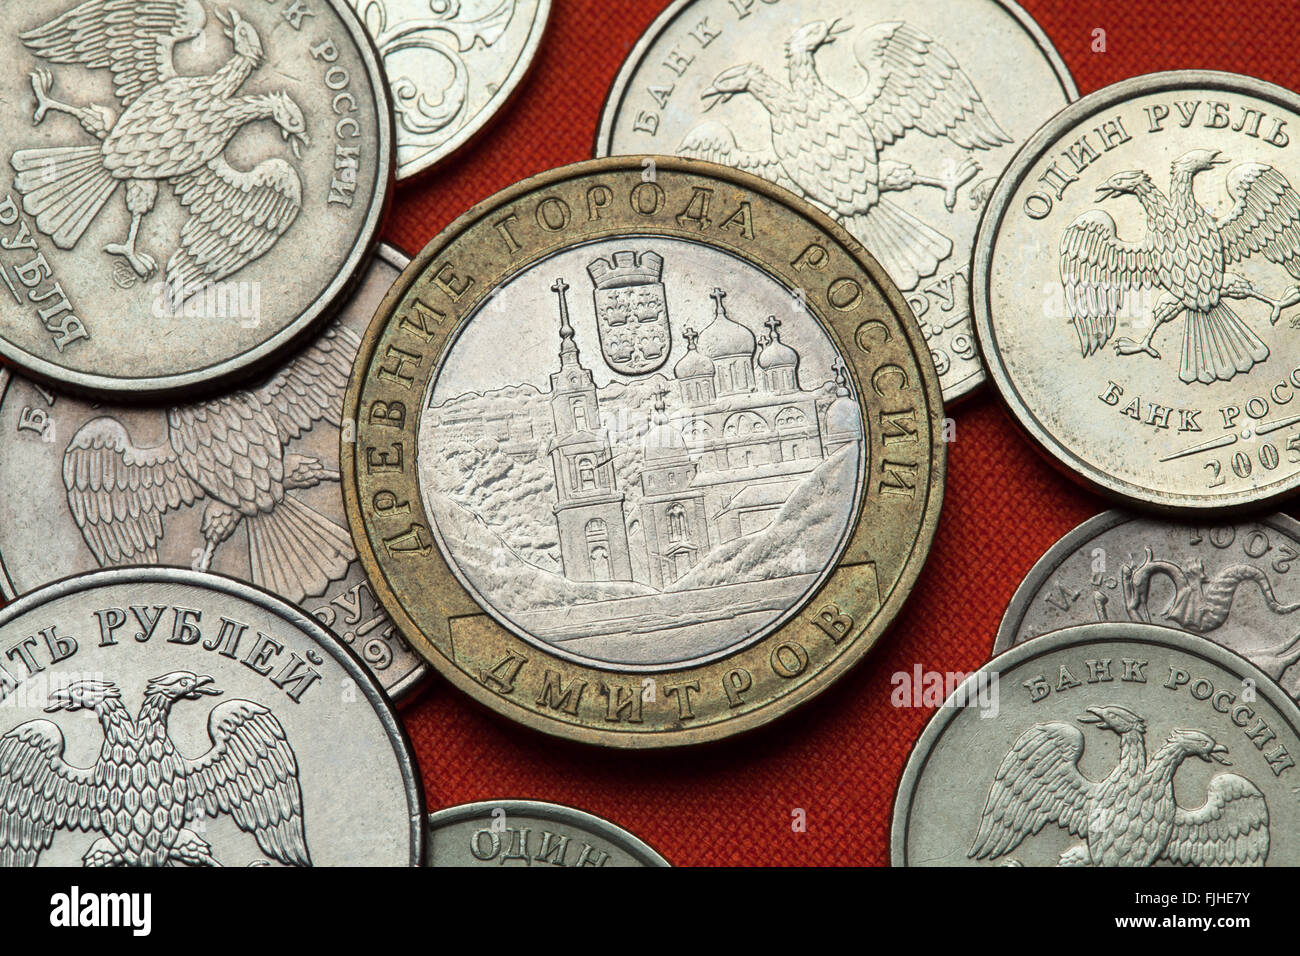 Coins of Russia. Town of Dmitrov depicted in the Russian commemorative 10 ruble coin dedicated to Russian Historical Towns. Stock Photo